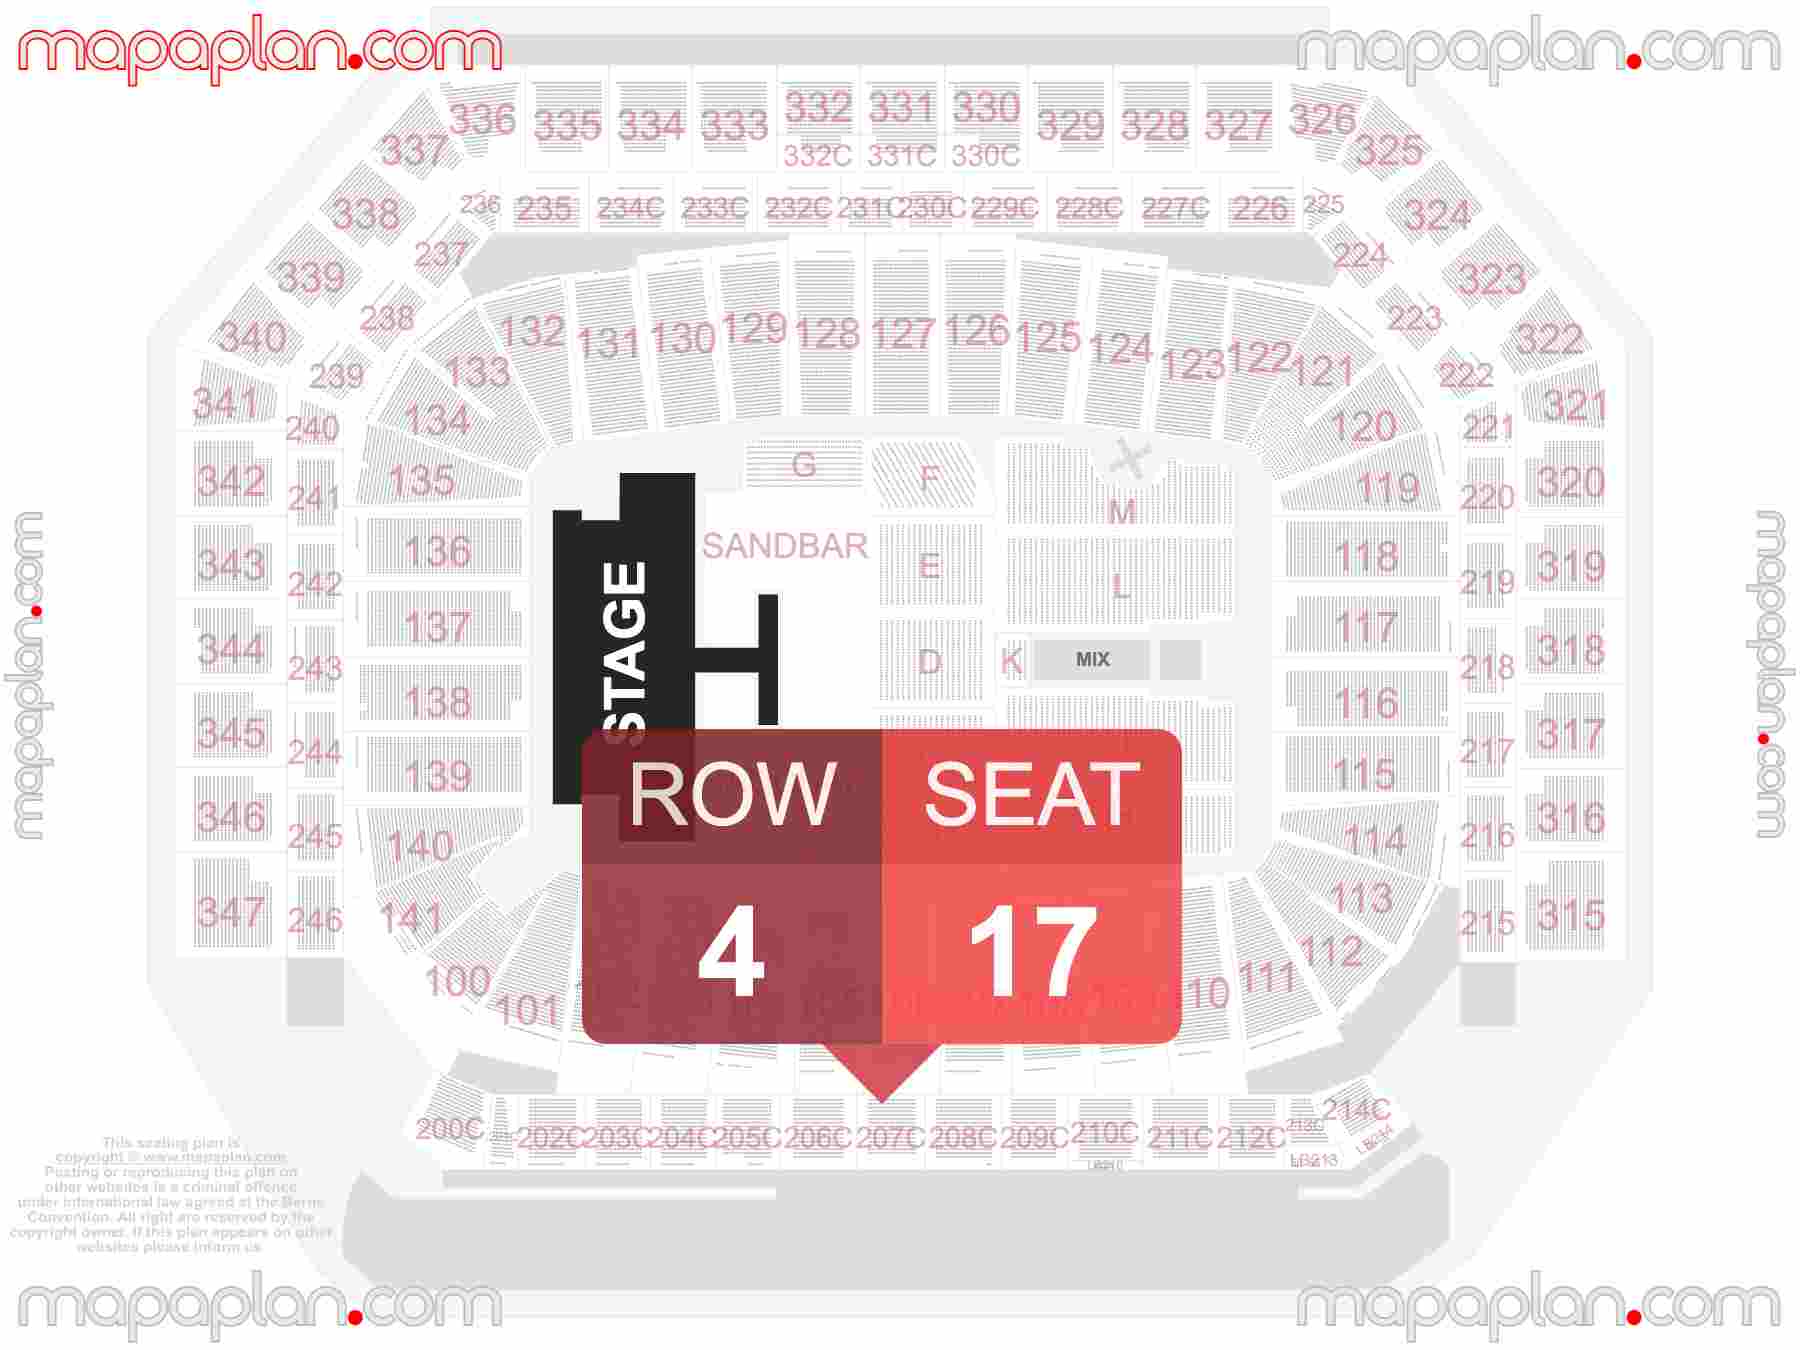 Detroit Ford Field seating chart Concert with extended catwalk runway B-stage seating chart with exact section numbers showing best rows and seats selection 3d layout - Best interactive seat finder tool with precise detailed location data